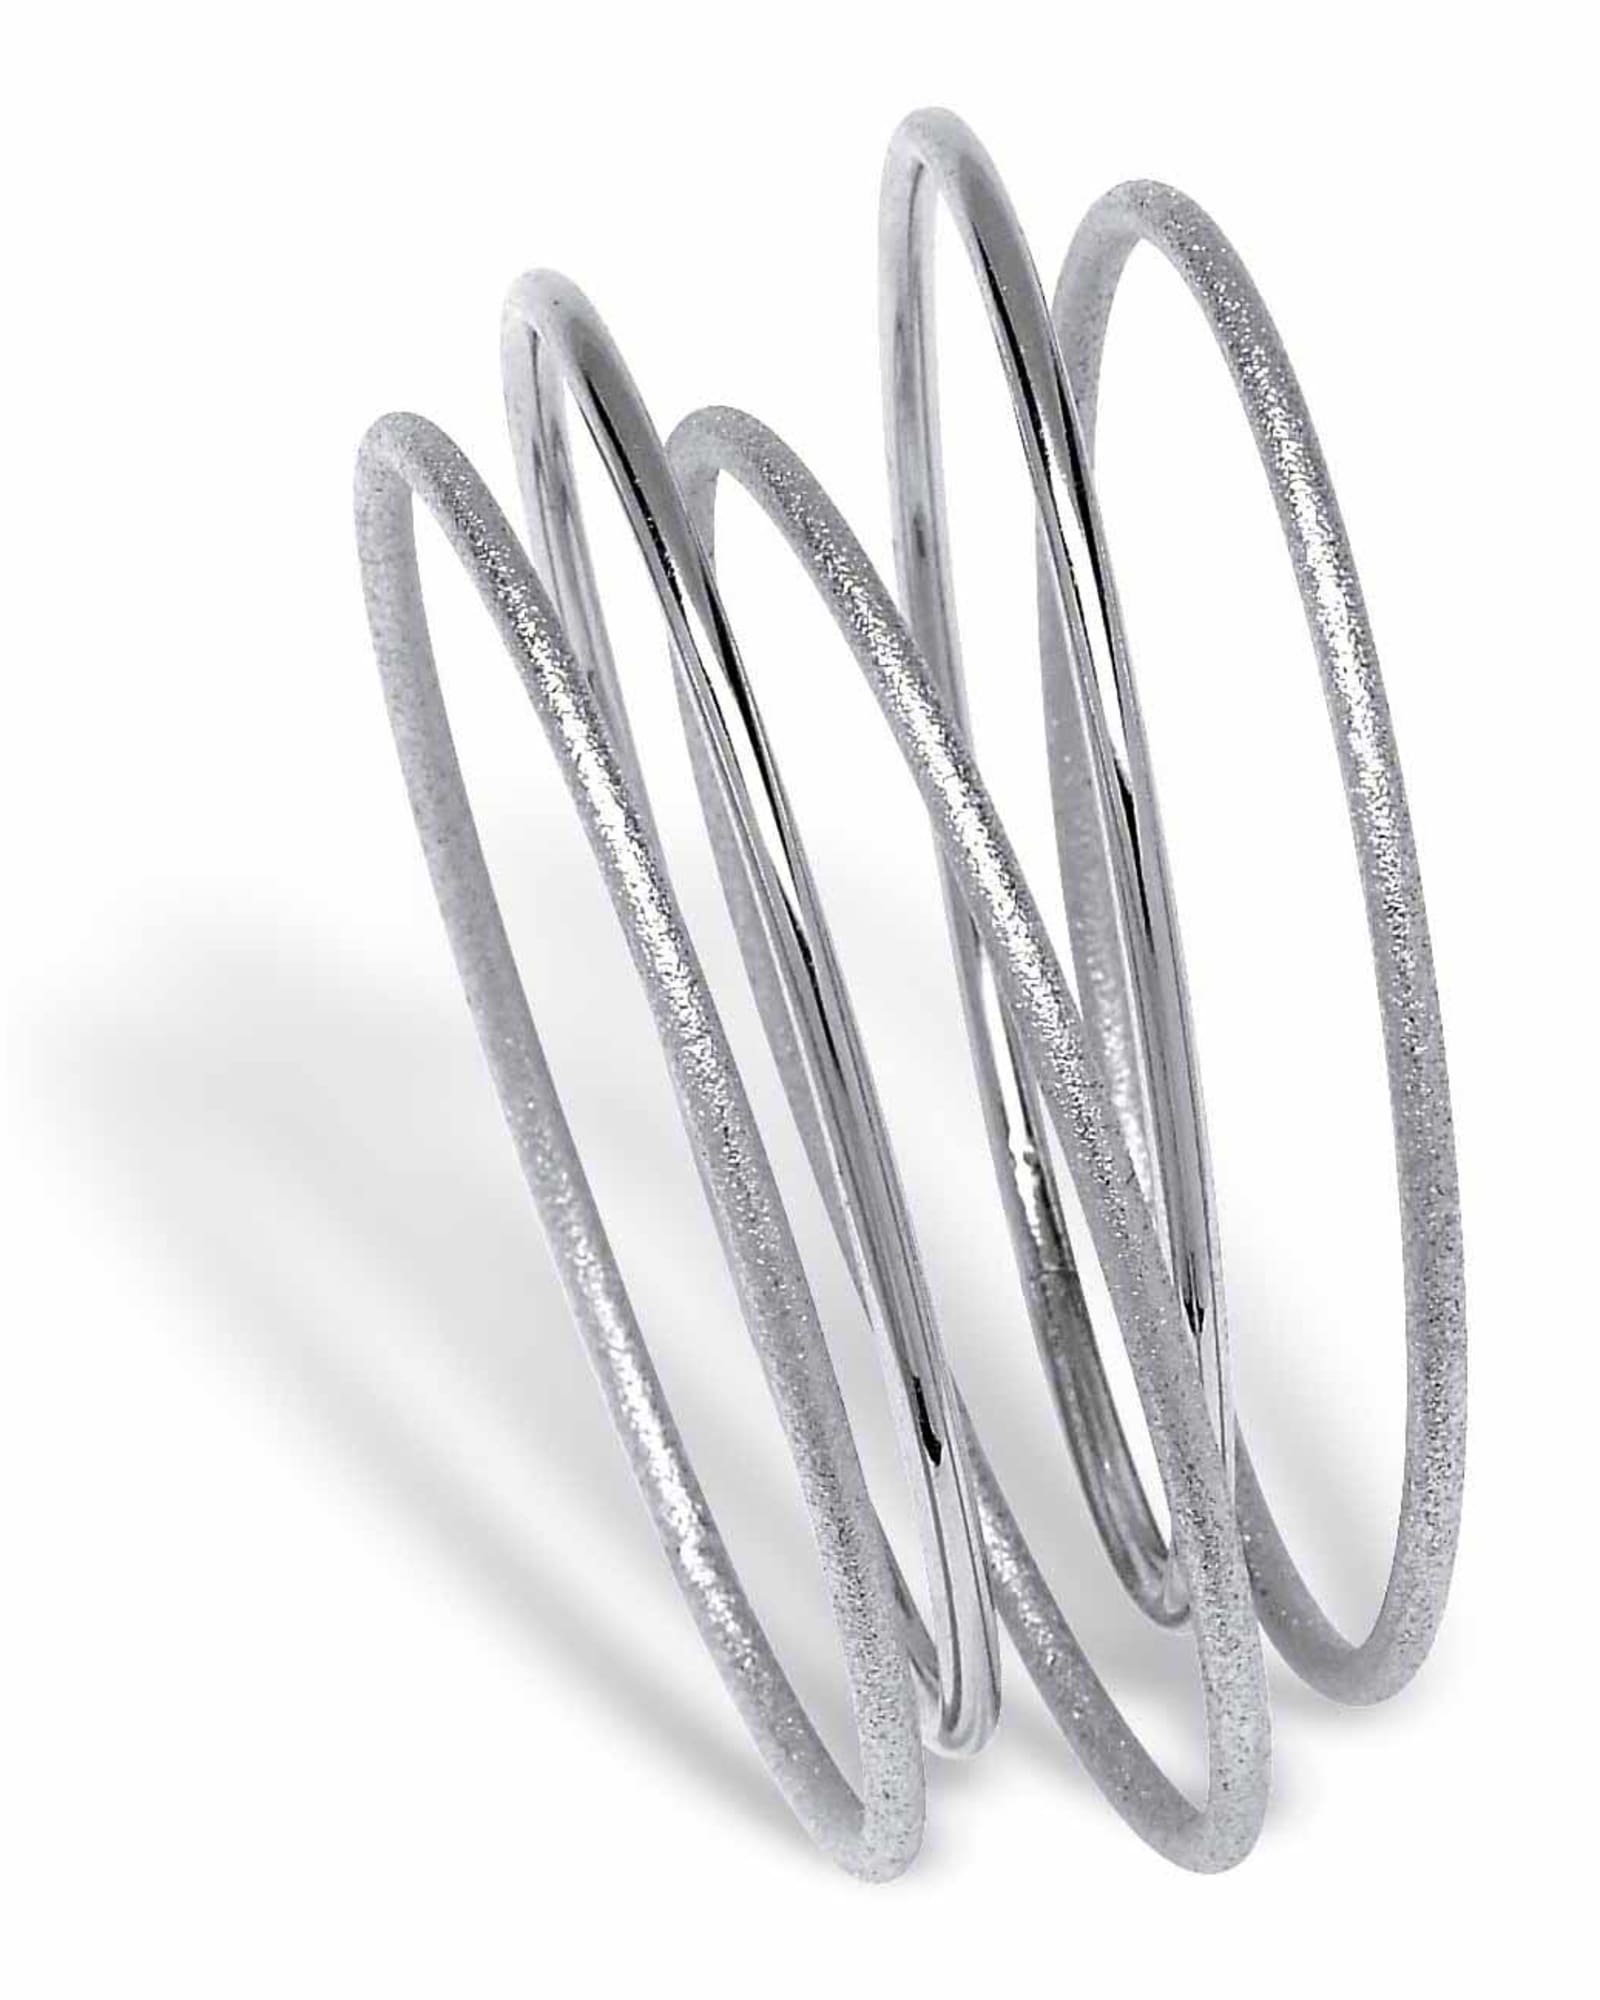 Textured and Polished 5-Piece Bangle Bracelet Set in Silvertone 9